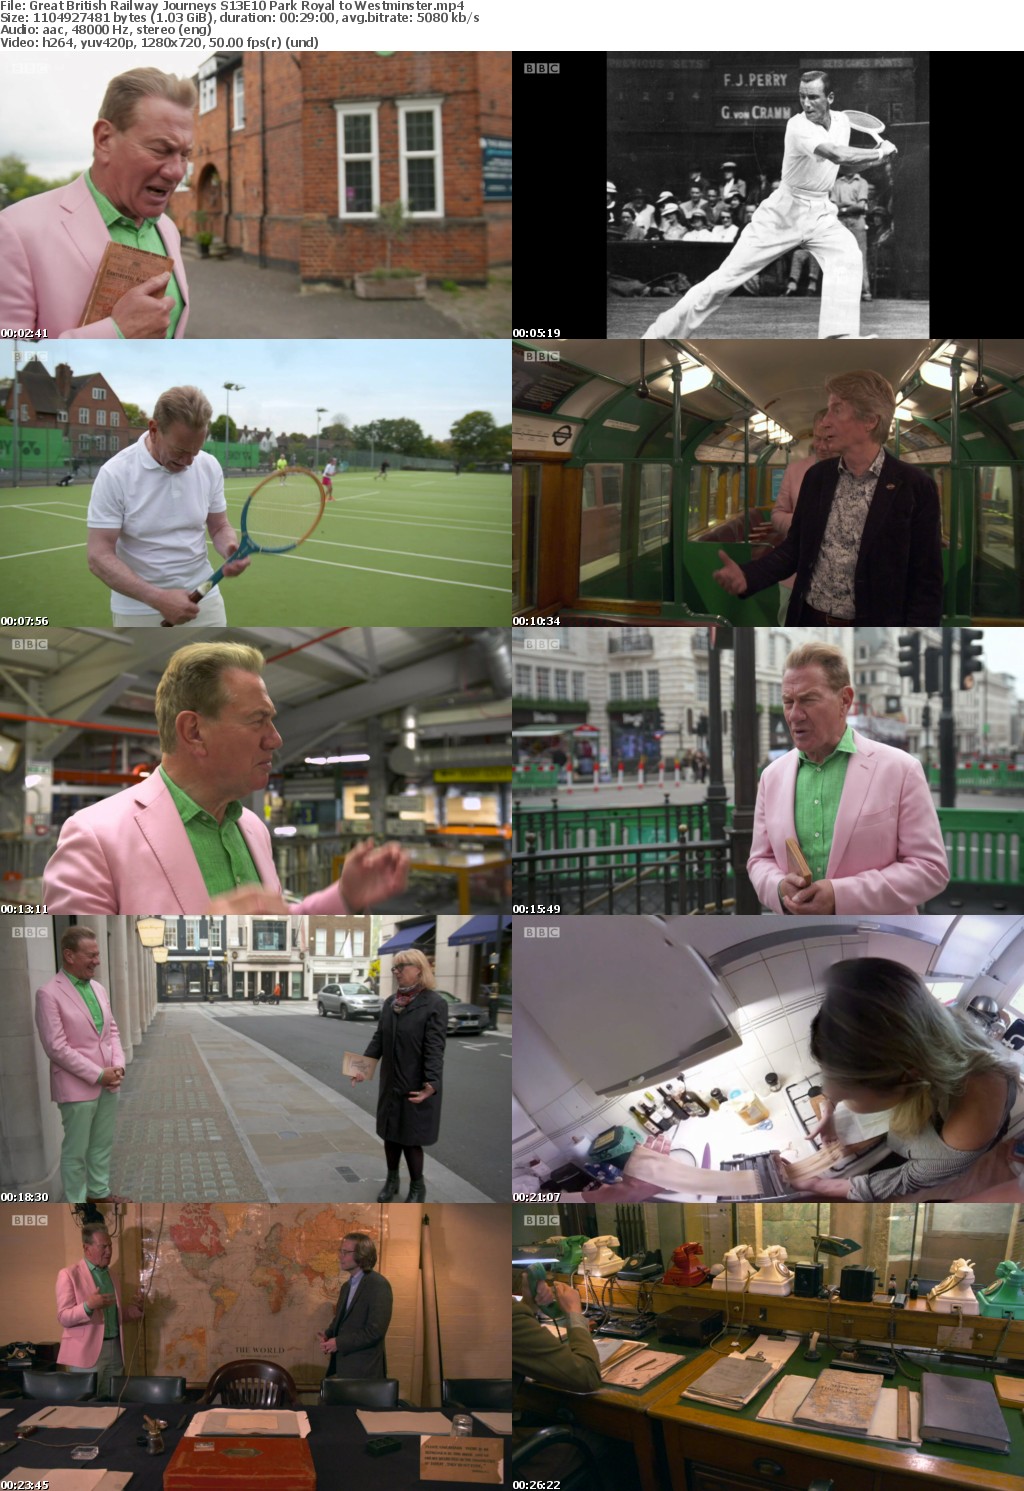 Great British Railway Journeys S13E10 Park Royal to Westminster (1280x720p HD, 50fps, soft Eng subs)